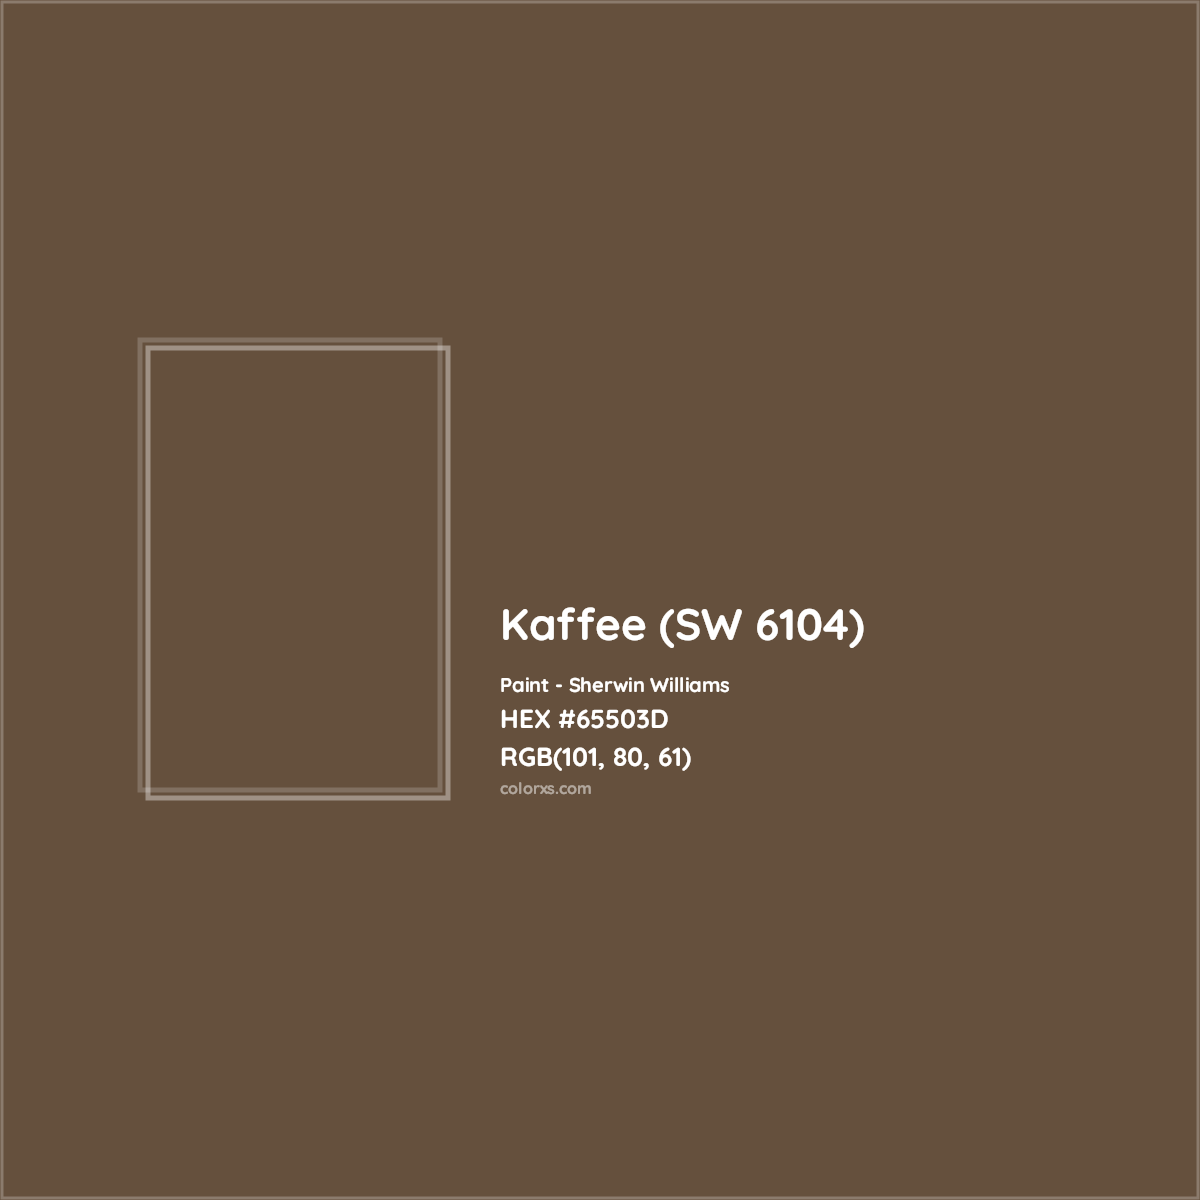 HEX #65503D Kaffee (SW 6104) Paint Sherwin Williams - Color Code